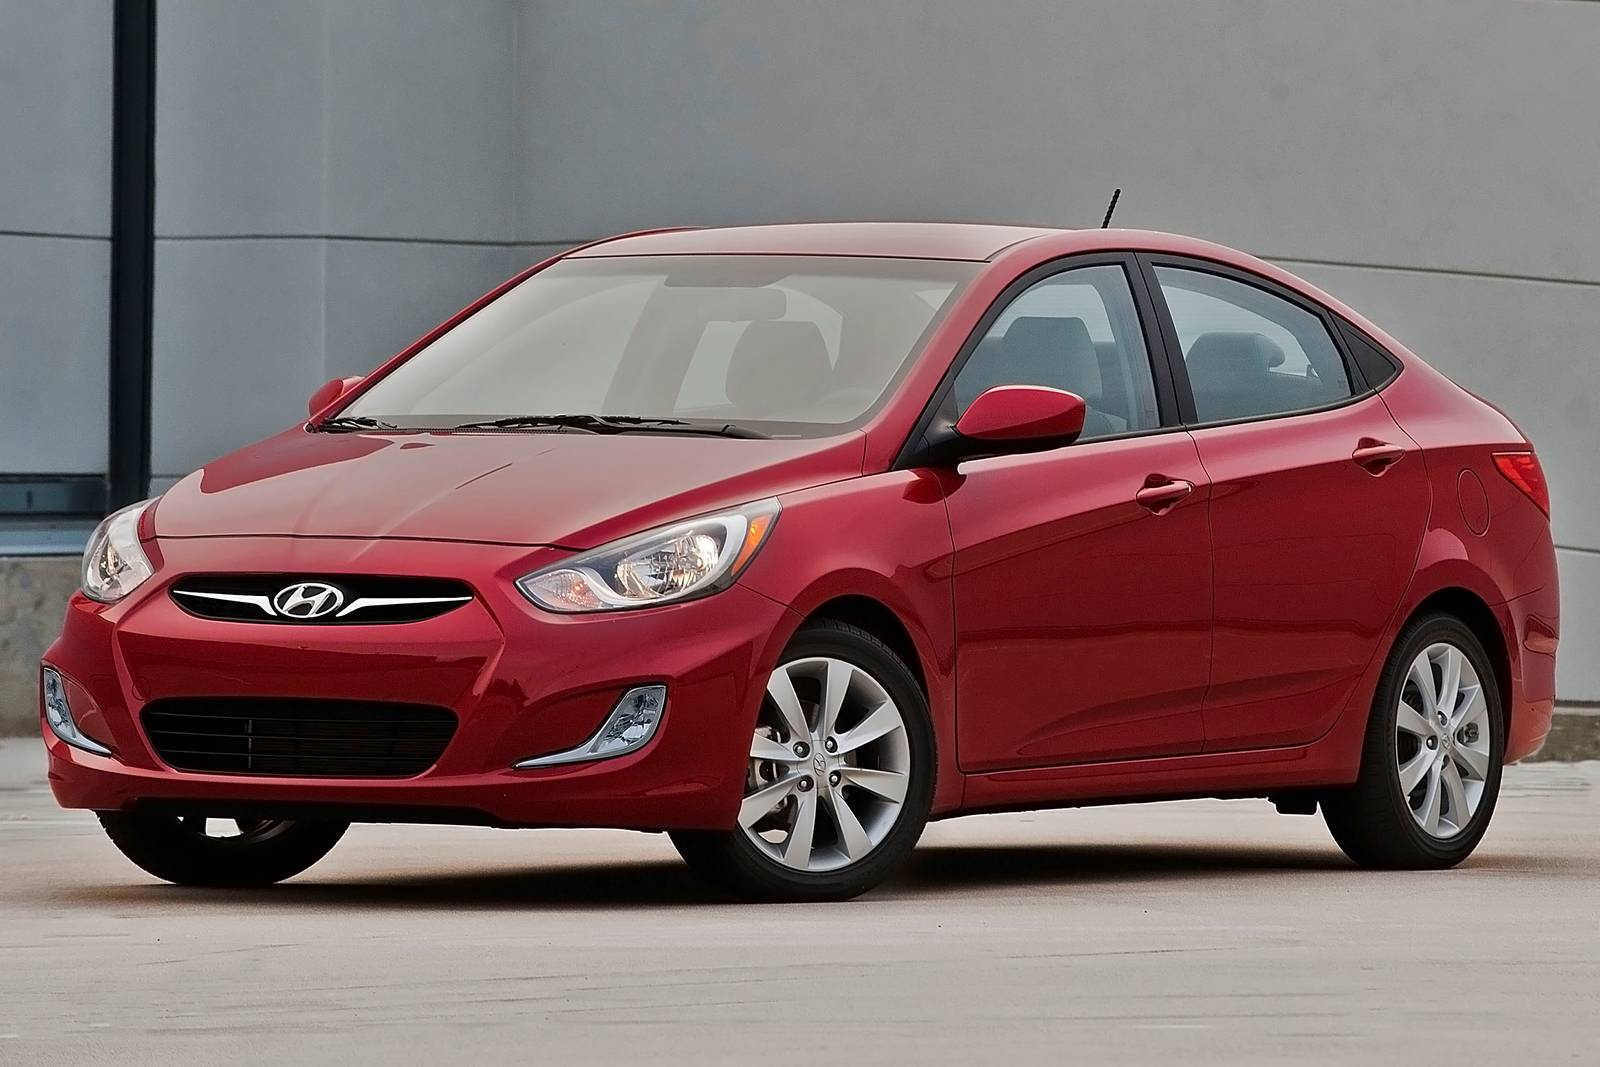 Used 2017 Hyundai Accent SE Hatchback Review & Ratings | Edmunds